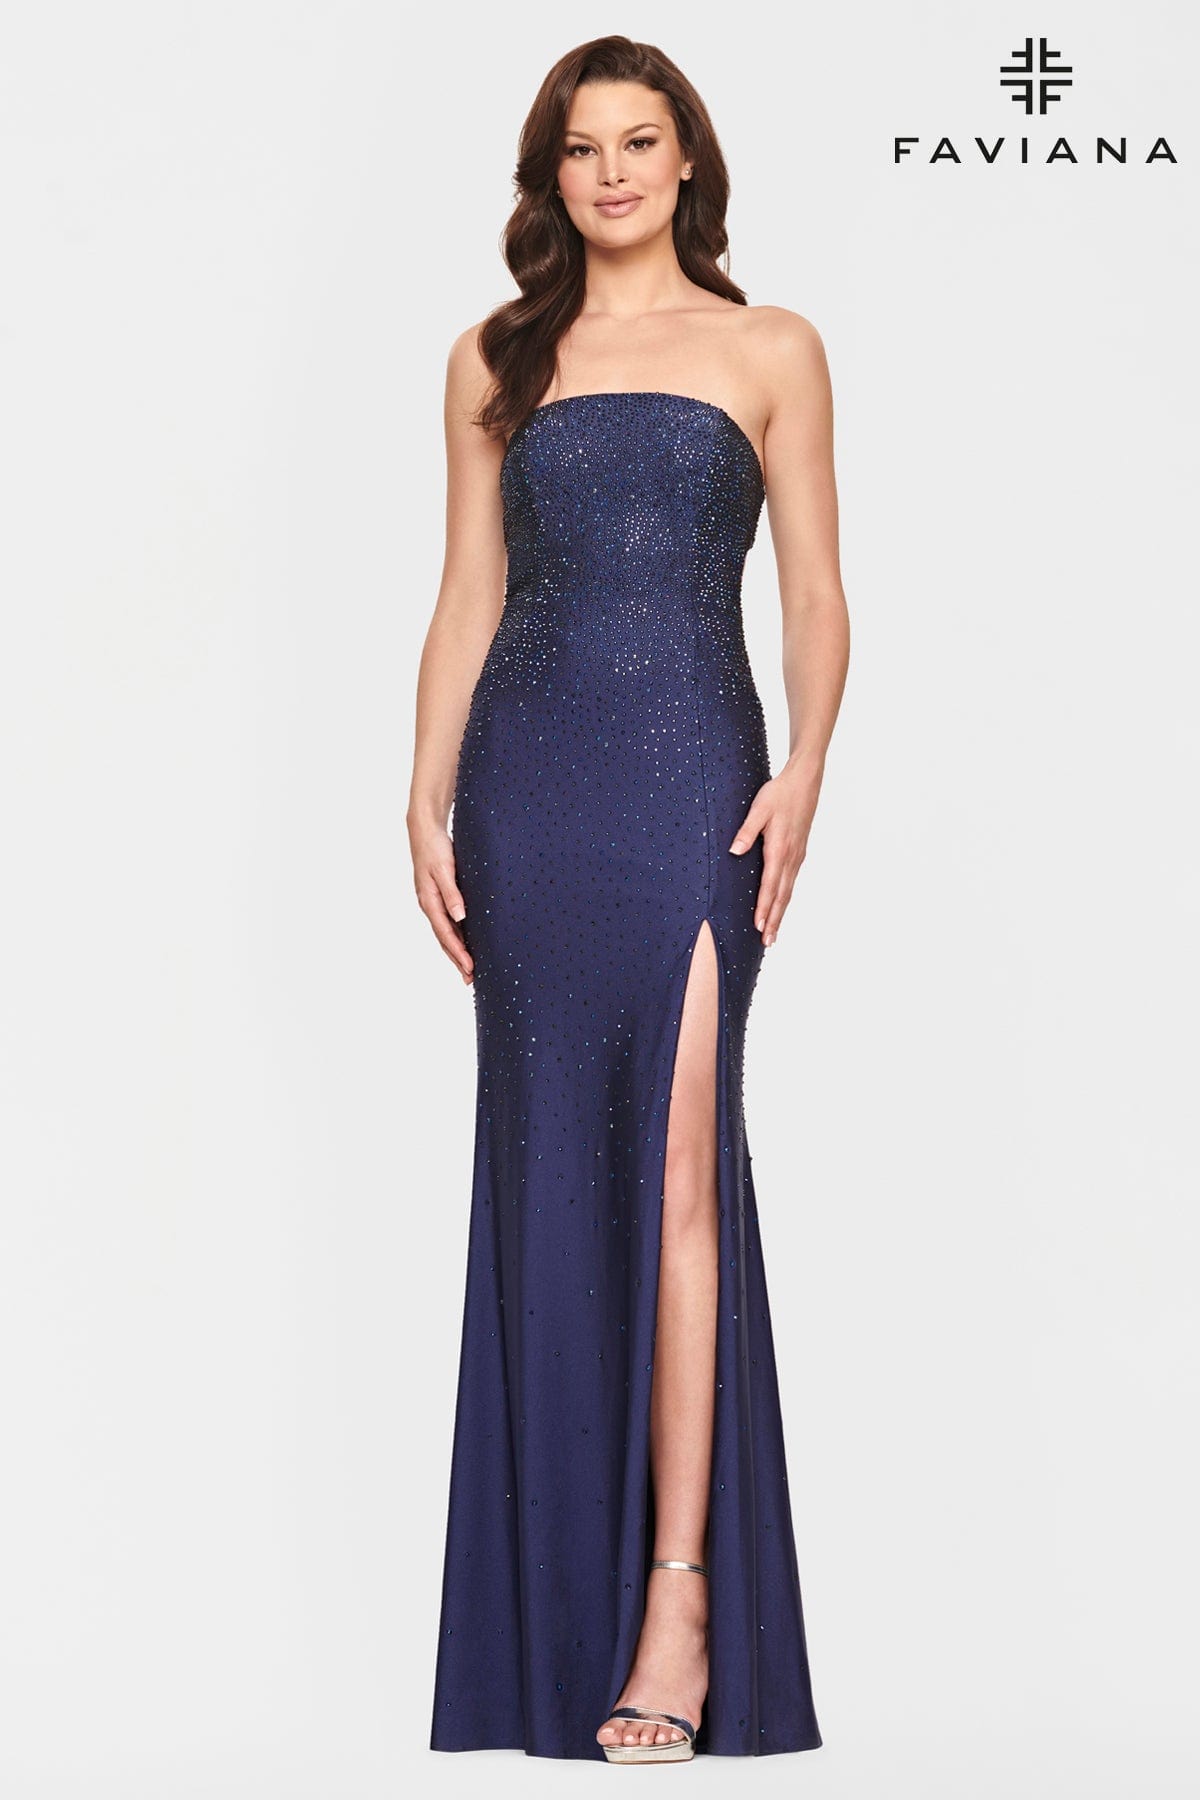 Strapless Long Dress Prom Featuring Rhinestone Beading And Lace Up Back